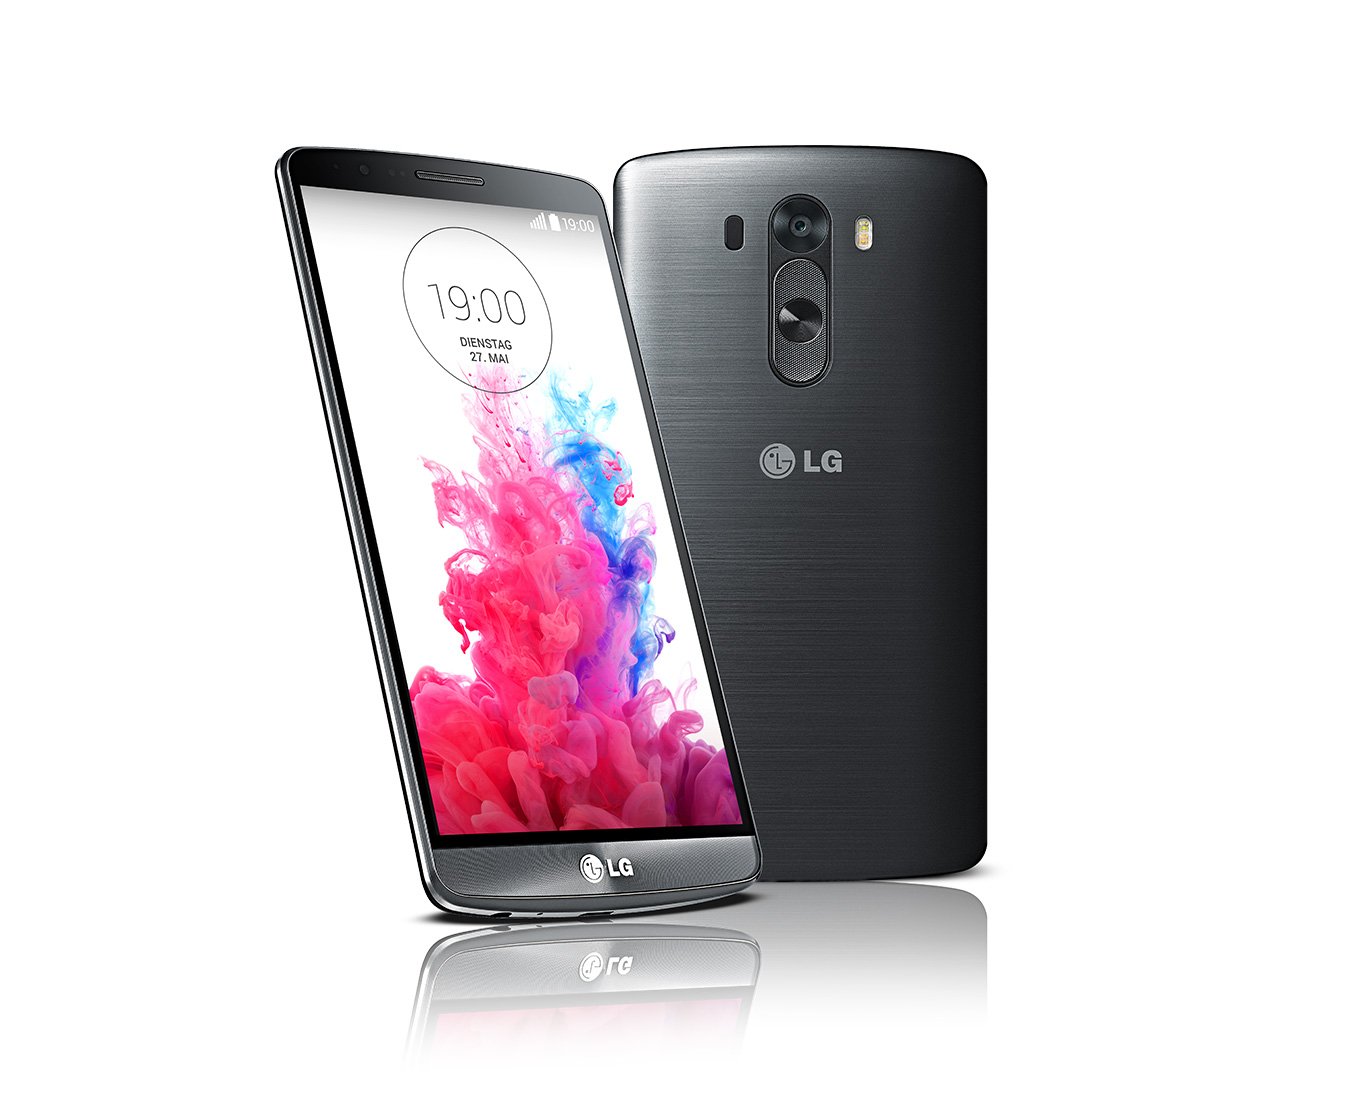 LG G3: Impressive Android flagship [Review]